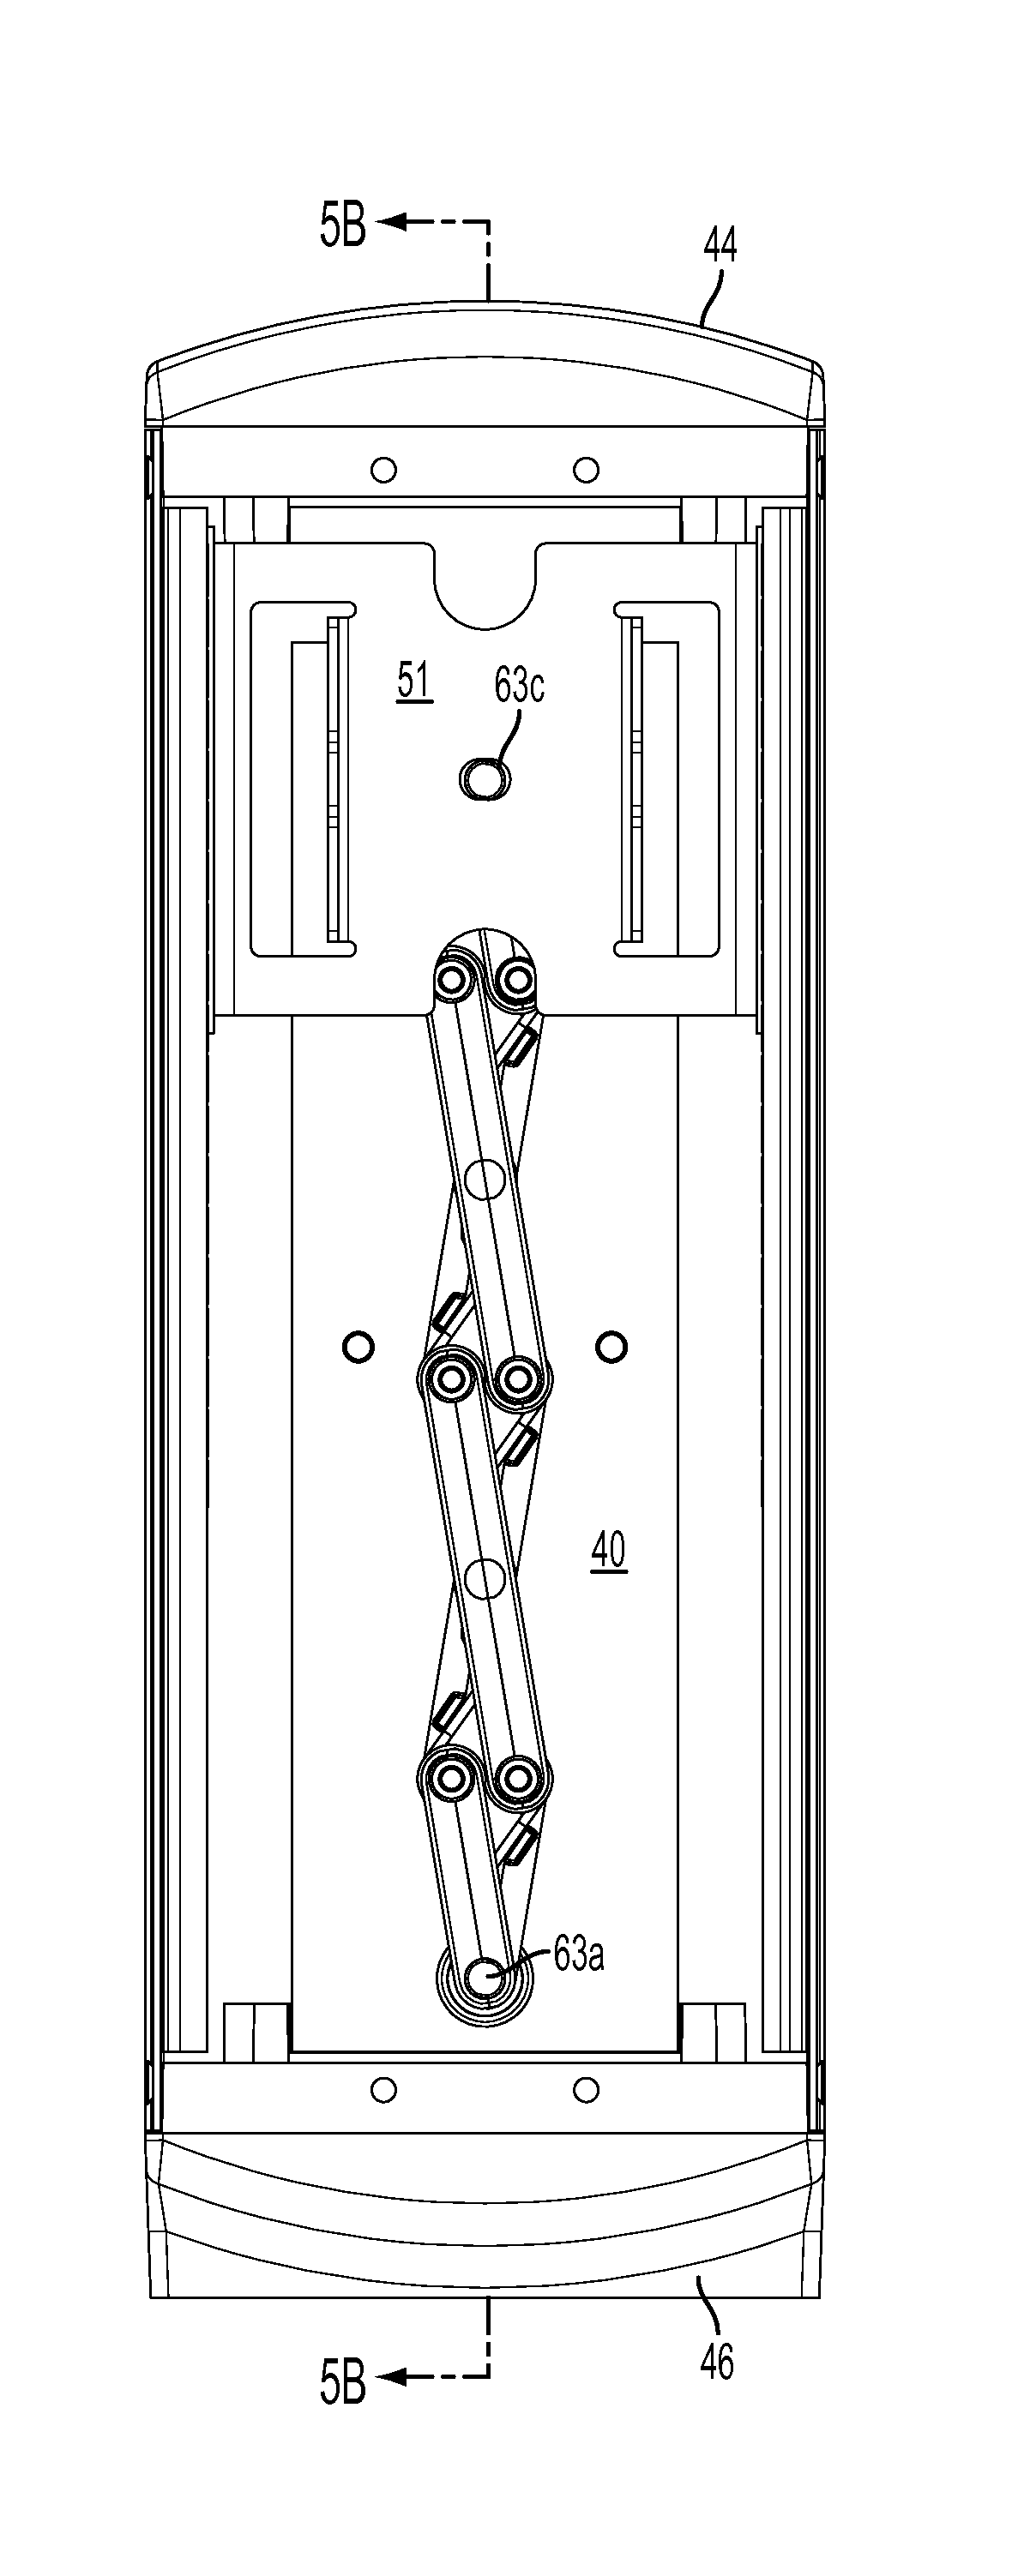 Device for positioning an object at a user-adjusted postion